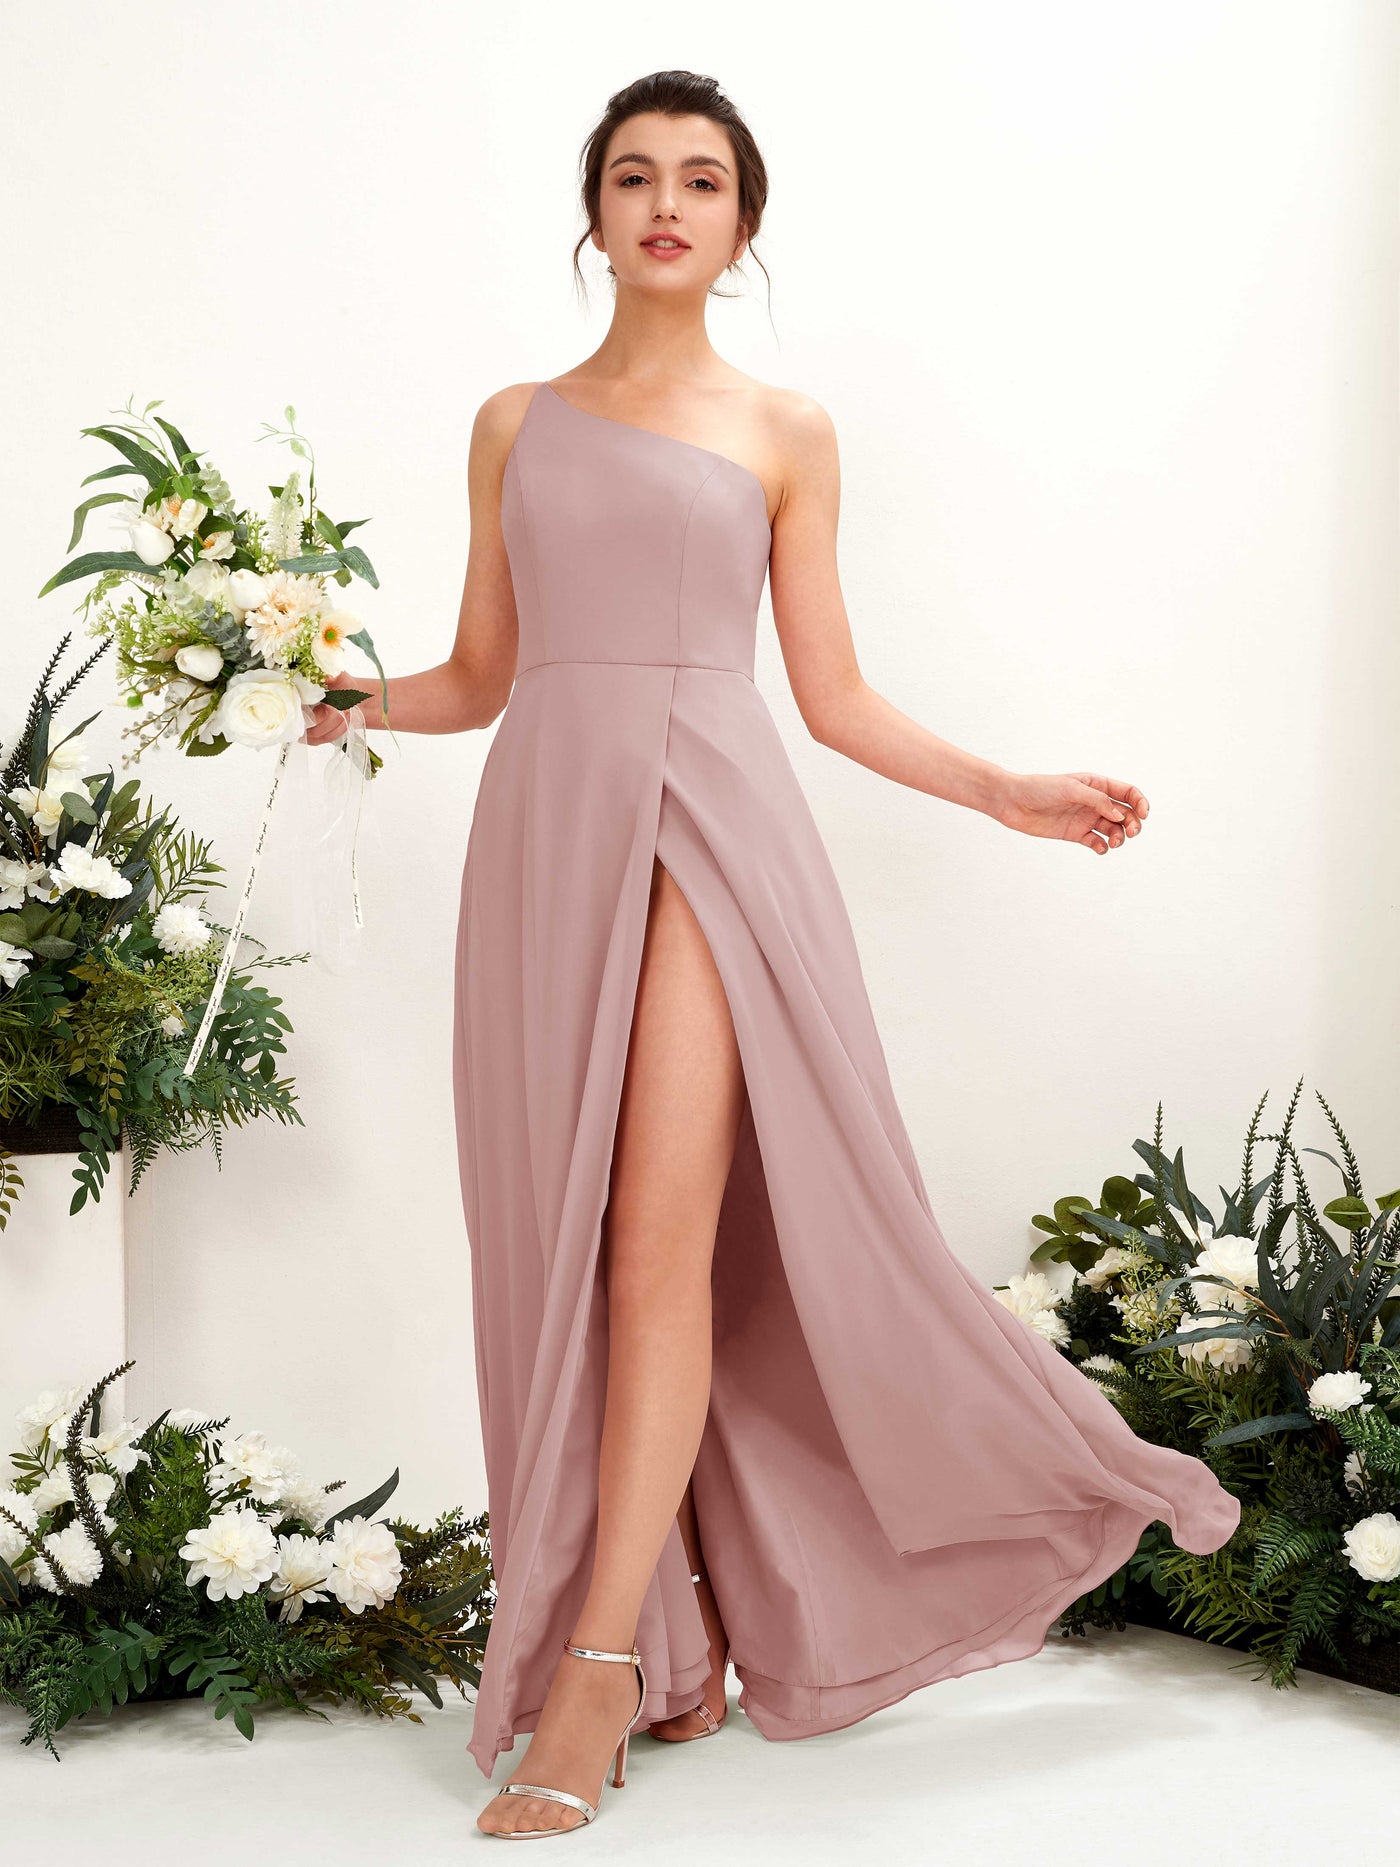 Dusty Rose Bridesmaid Dresses Bridesmaid Dress A-line Chiffon One Shoulder Full Length Sleeveless Wedding Party Dress (81225709)#color_dusty-rose